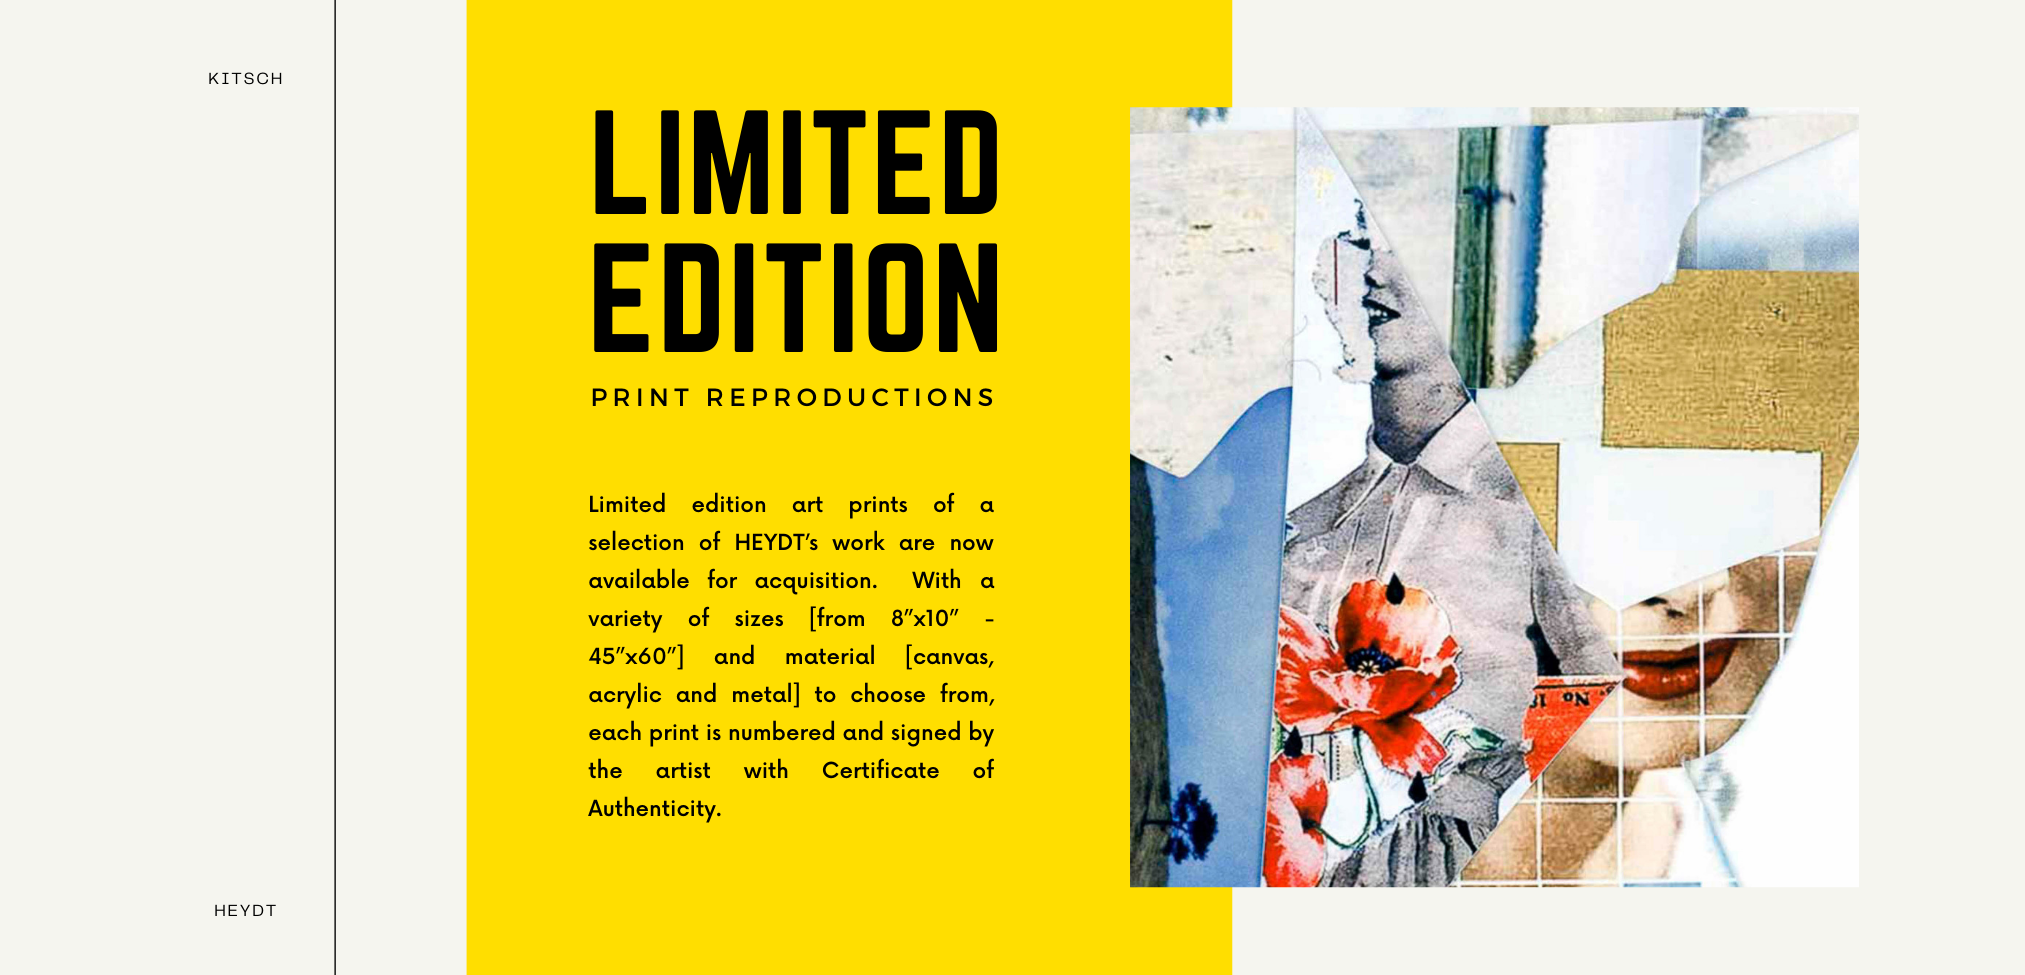 limited edition prints-KITSCH-HEYDT32.png